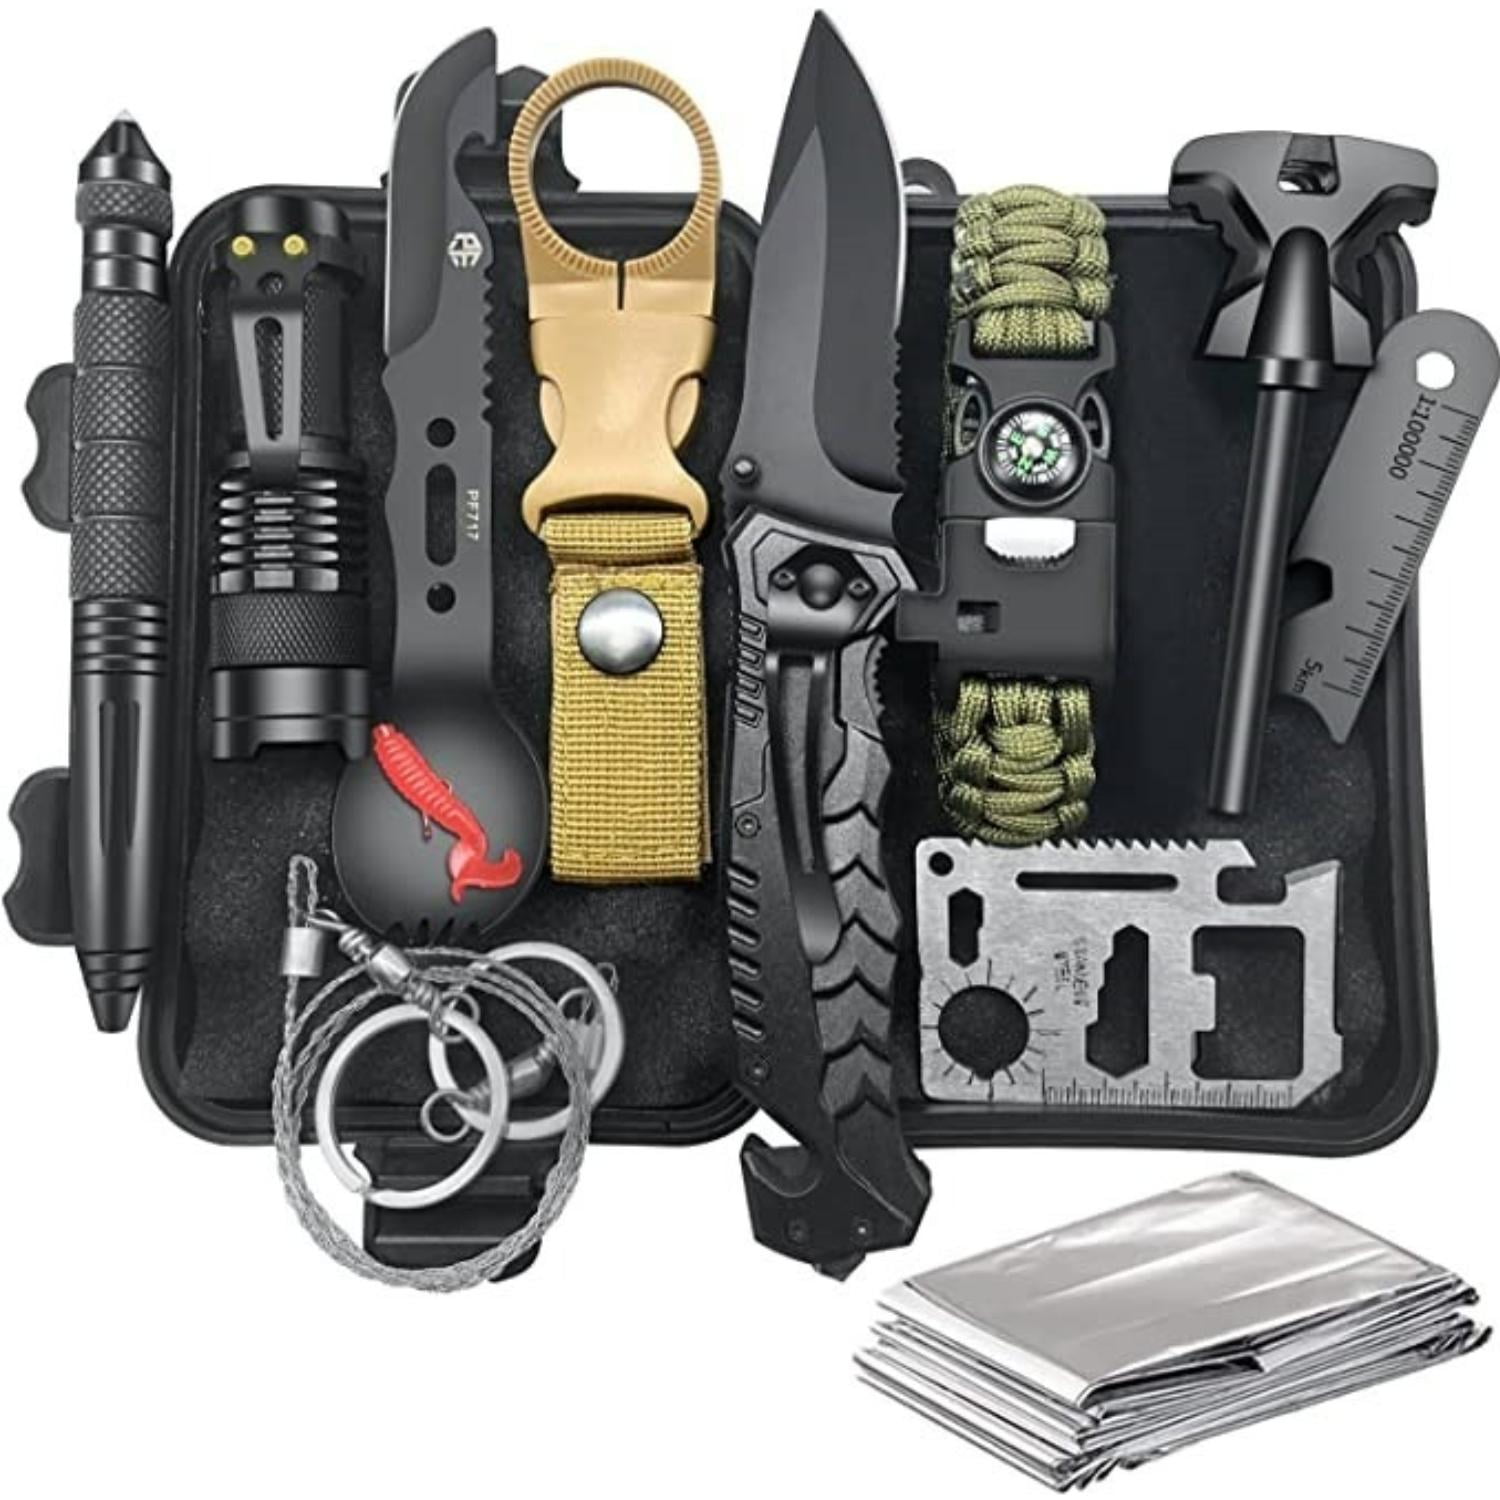 Gifts for Men Dad Husband Him, Survival Kit, Survival Tools with